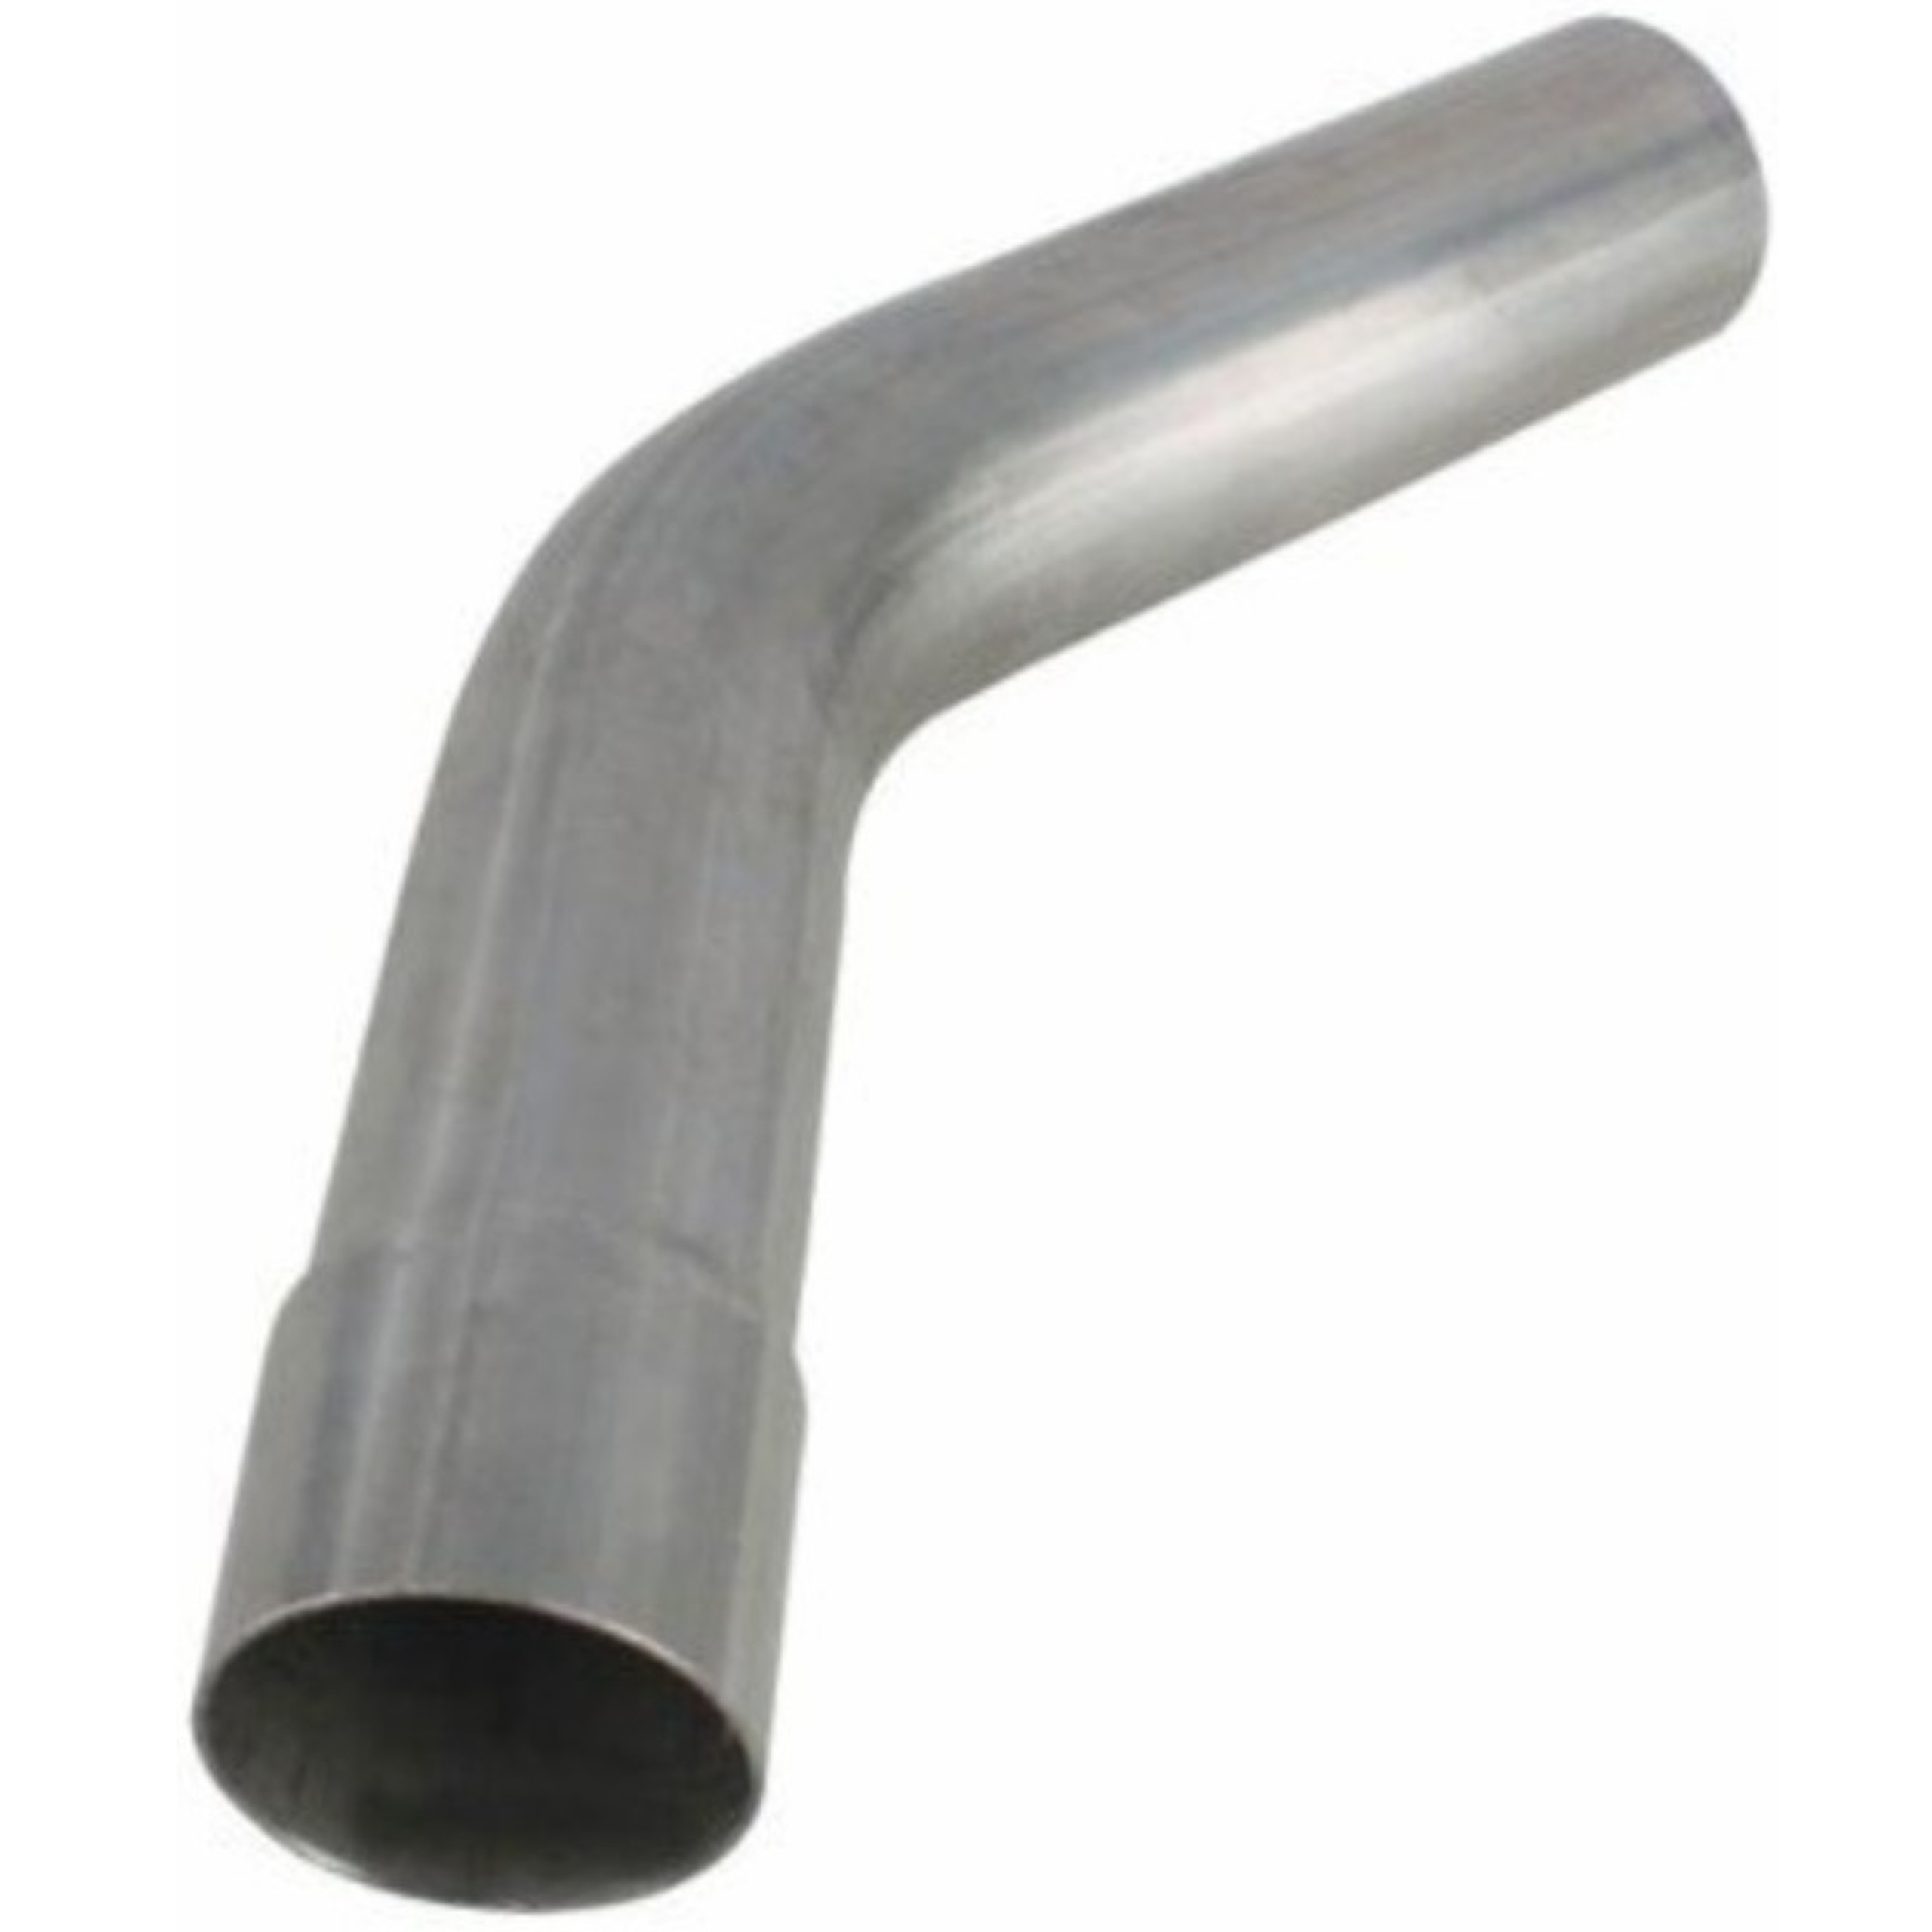 5 inch Stainless Steel Exhaust Elbows